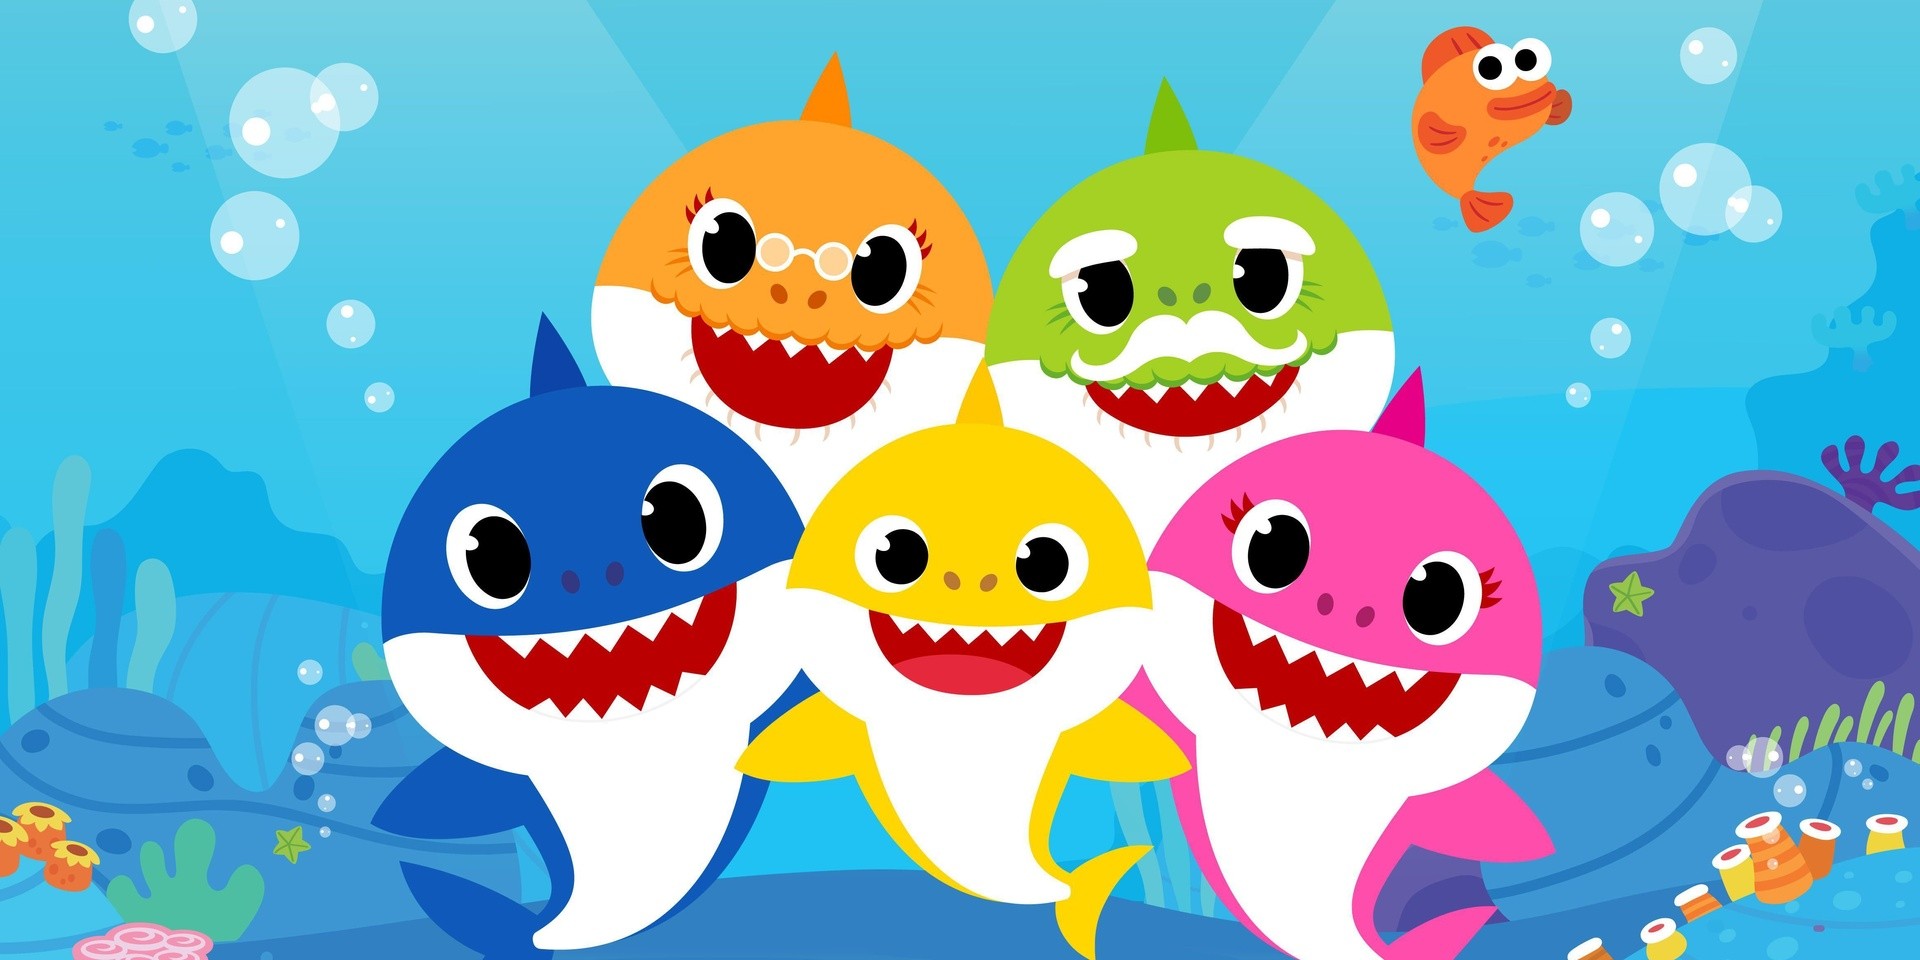 ‘Baby Shark Dance’ surpasses 'Despacito' to become the first video in history to hit 10 billion views on YouTube